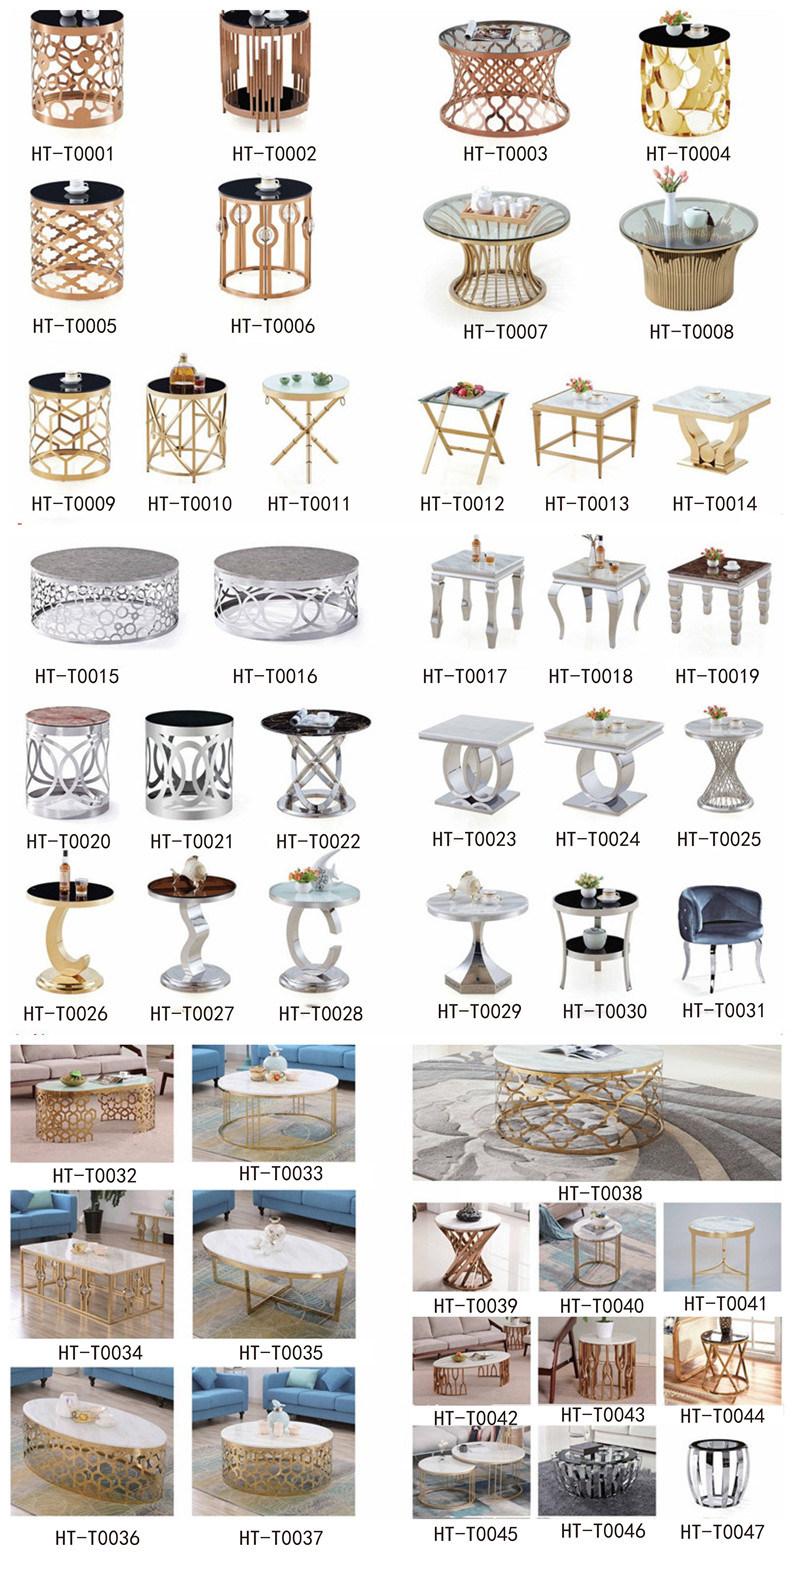 Modern Hotel Banquet Table Popular Cheap Price Gold Mirror White Marble Top Coffee Center Table